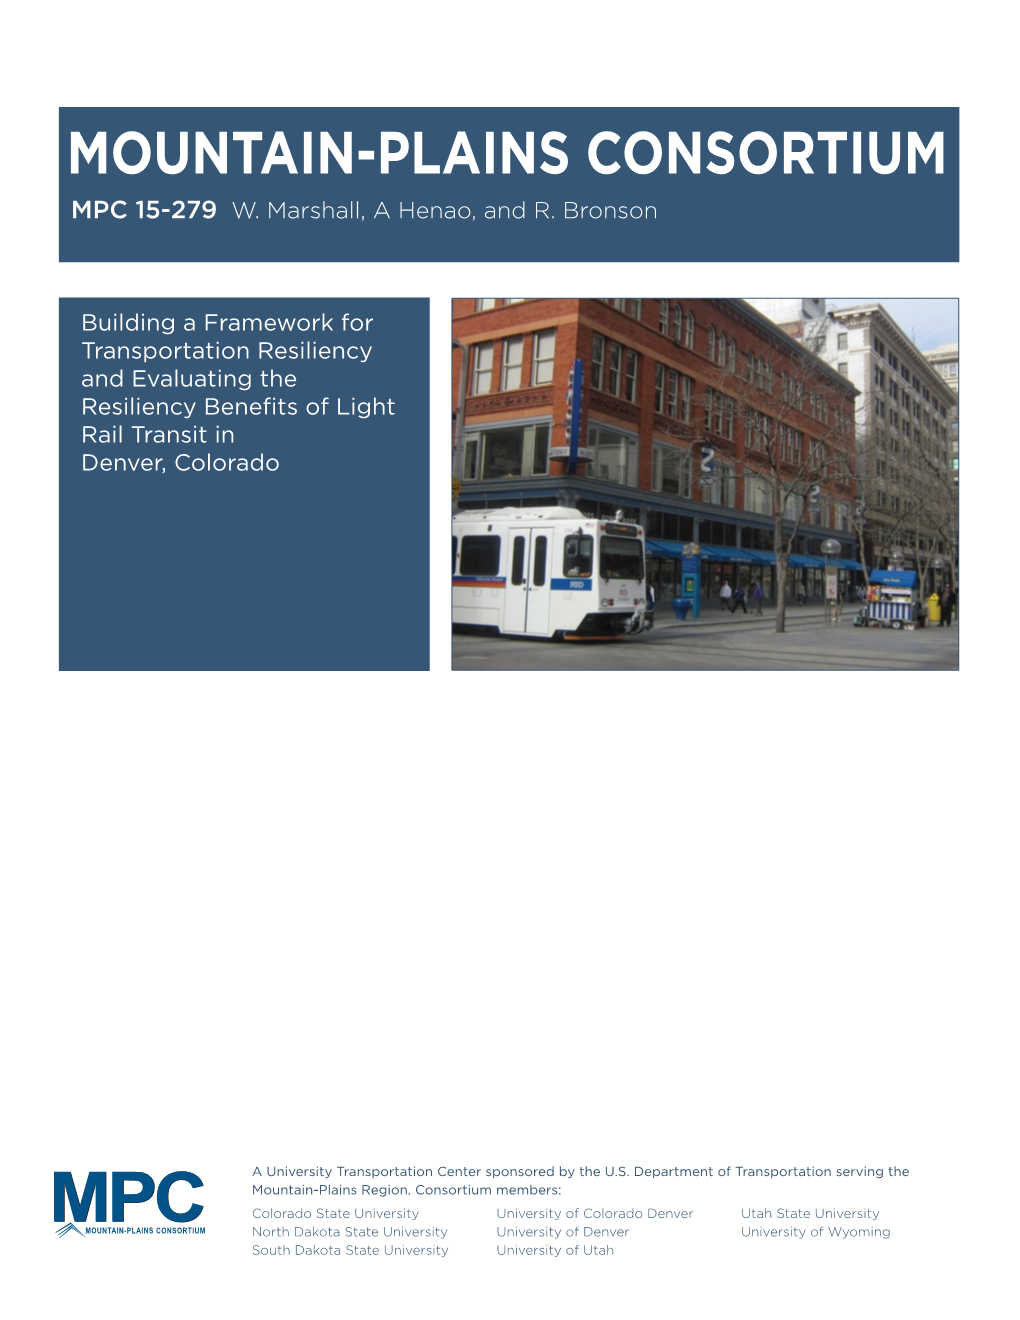 Building a Framework for Transportation Resiliency and Evaluating the Resiliency Benefits of Light Rail Transit in Denver, Colorado